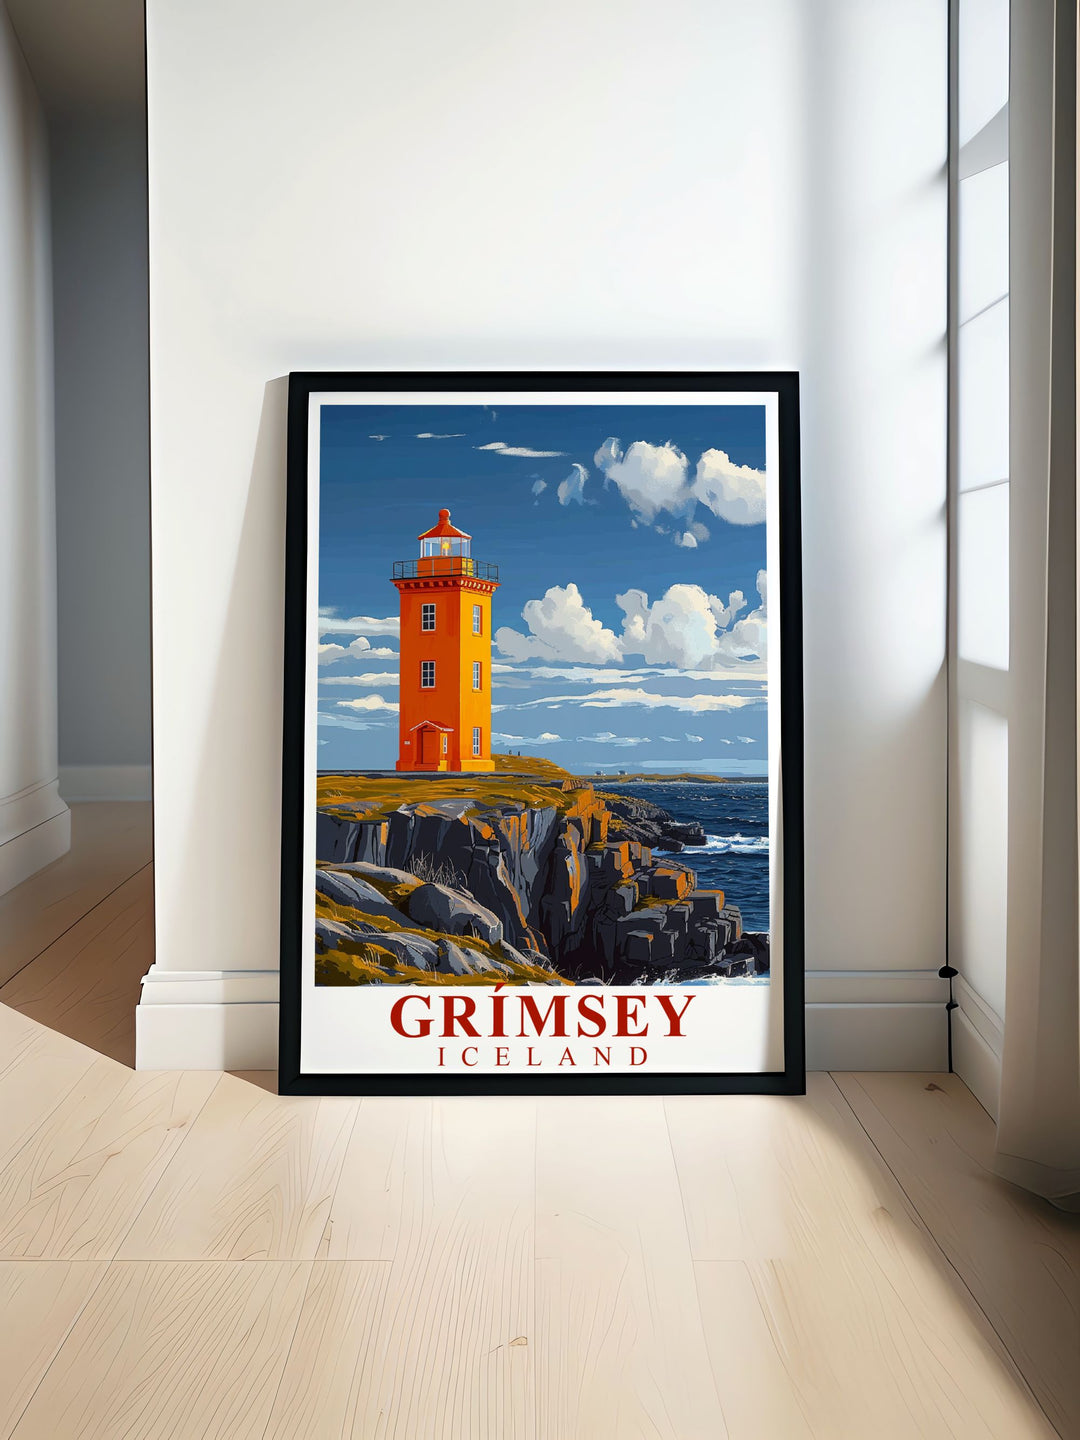 This travel poster of Grimsey Island, Iceland, features a vibrant depiction of the Northern Lights, with detailed illustrations of the islands coastline and night sky, making it perfect for home decor.